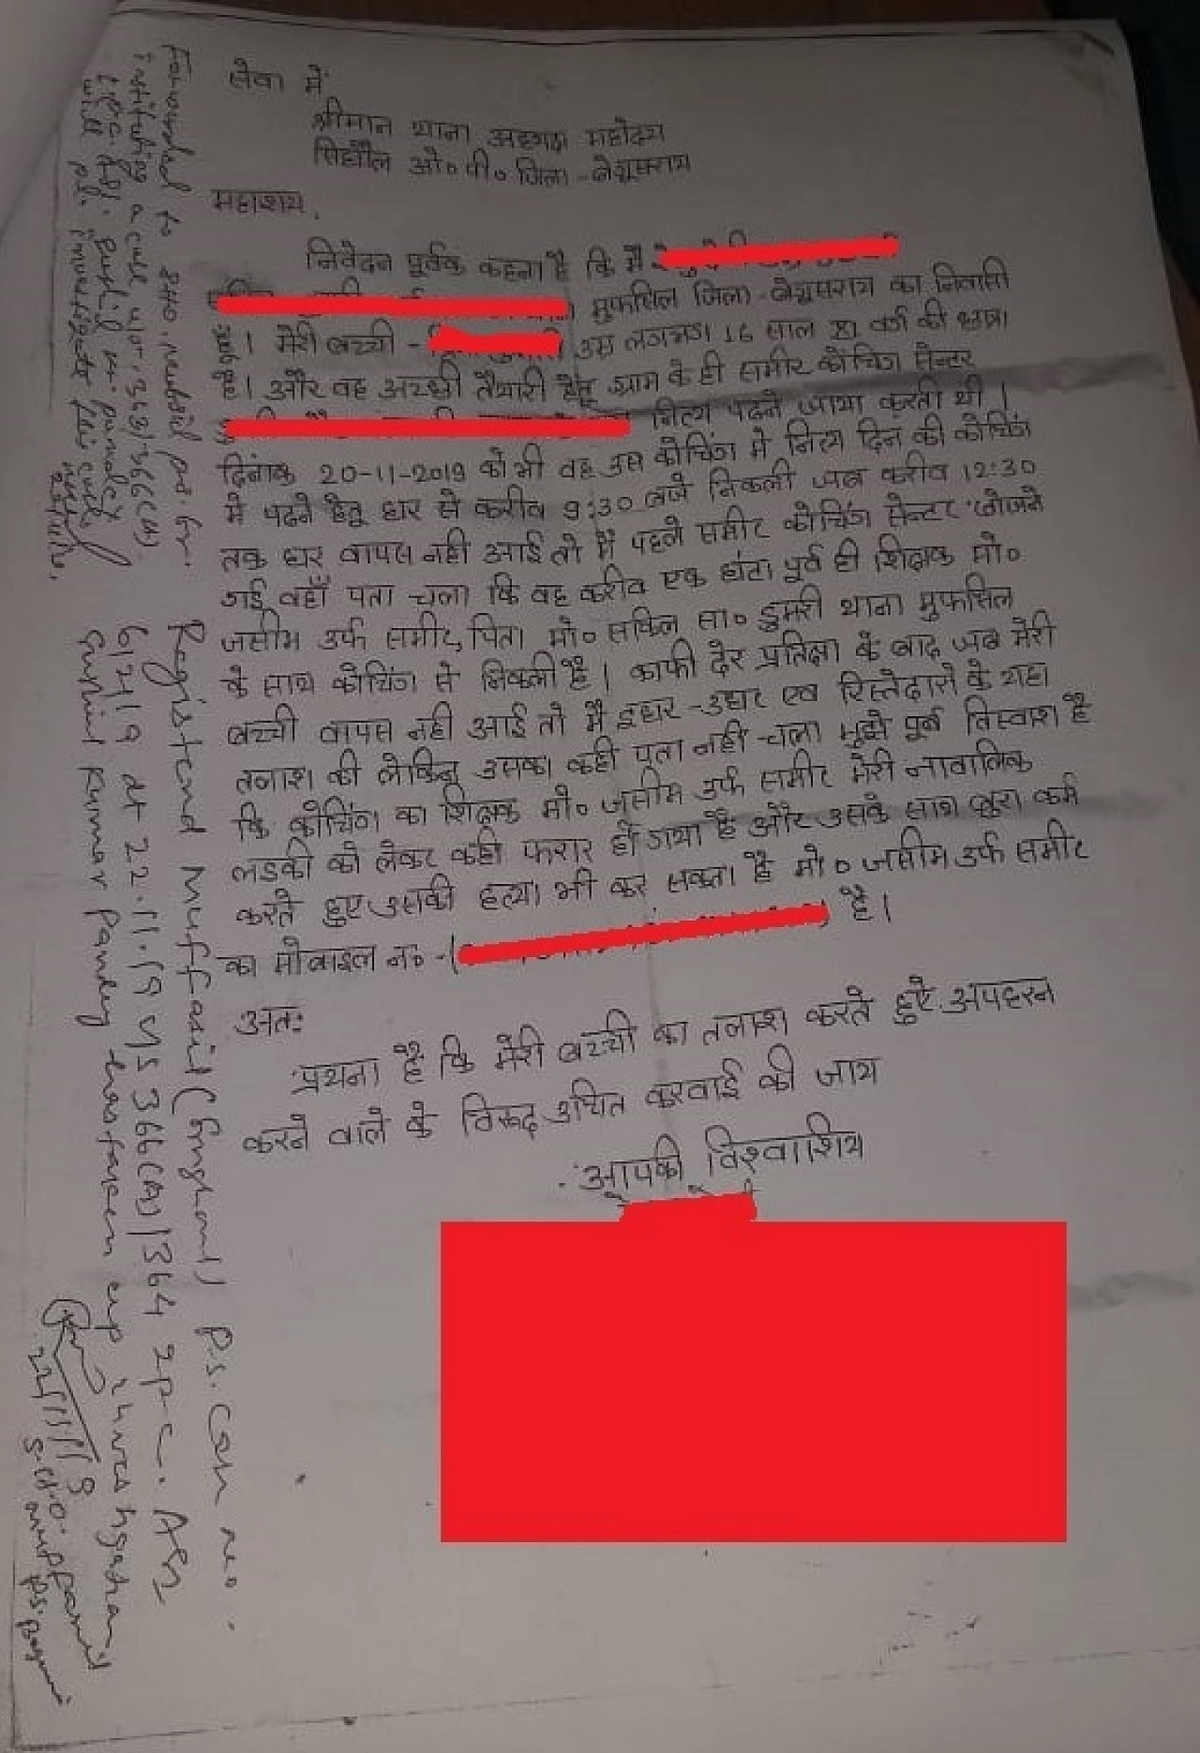 Complaint filed by the parents of the minor on 22 November.